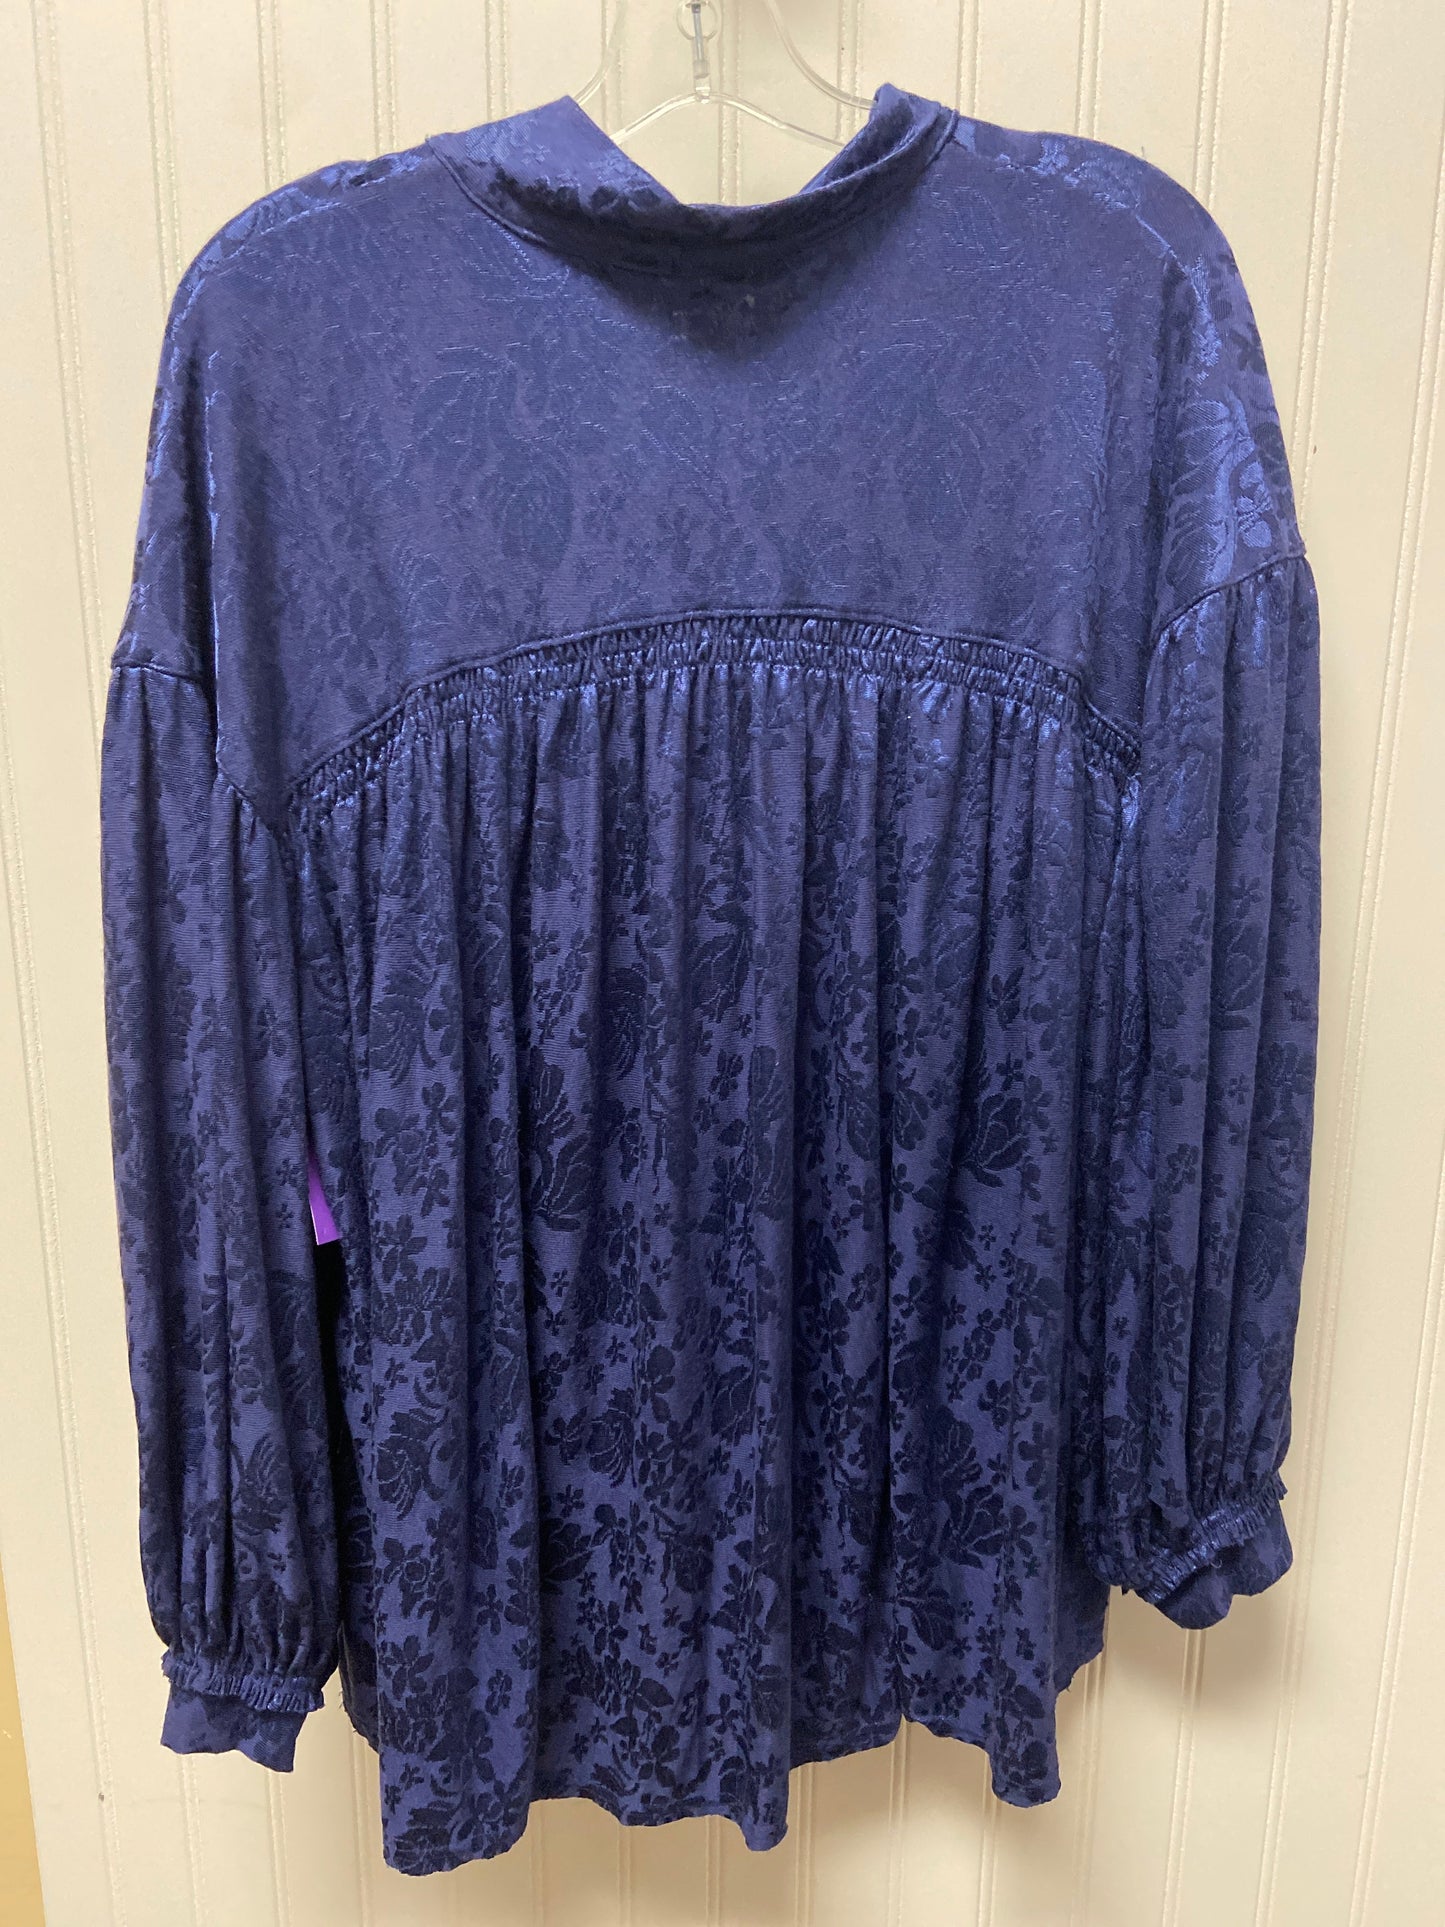 Blue Blouse 3/4 Sleeve Free People, Size S